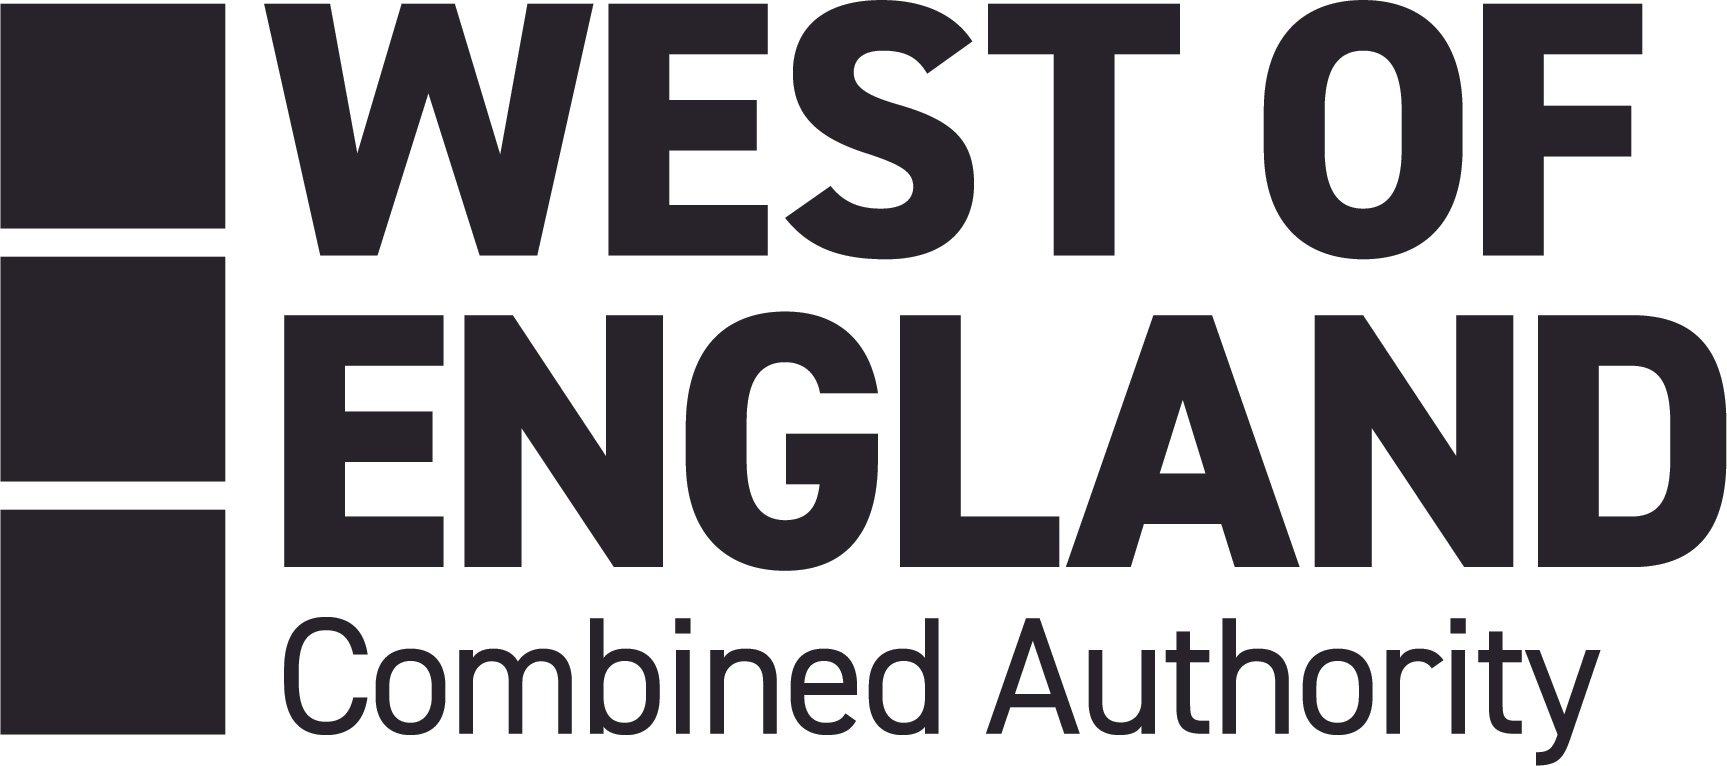 West of England Mayoral Combined Authority